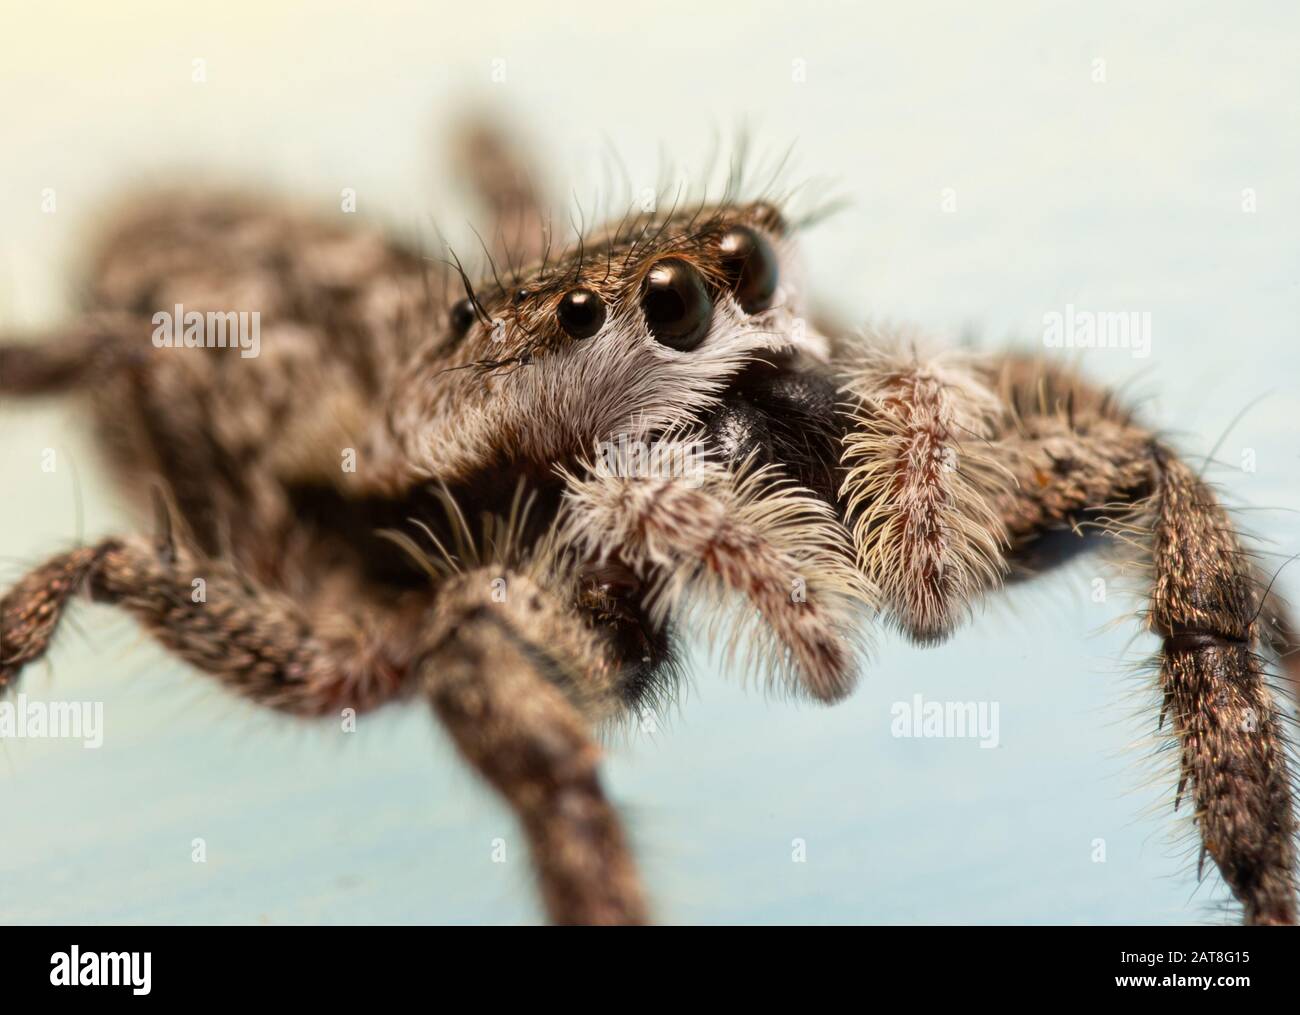 Side view of a fuzzy-faced, adorably cute female Tan Jumping Spider Stock Photo